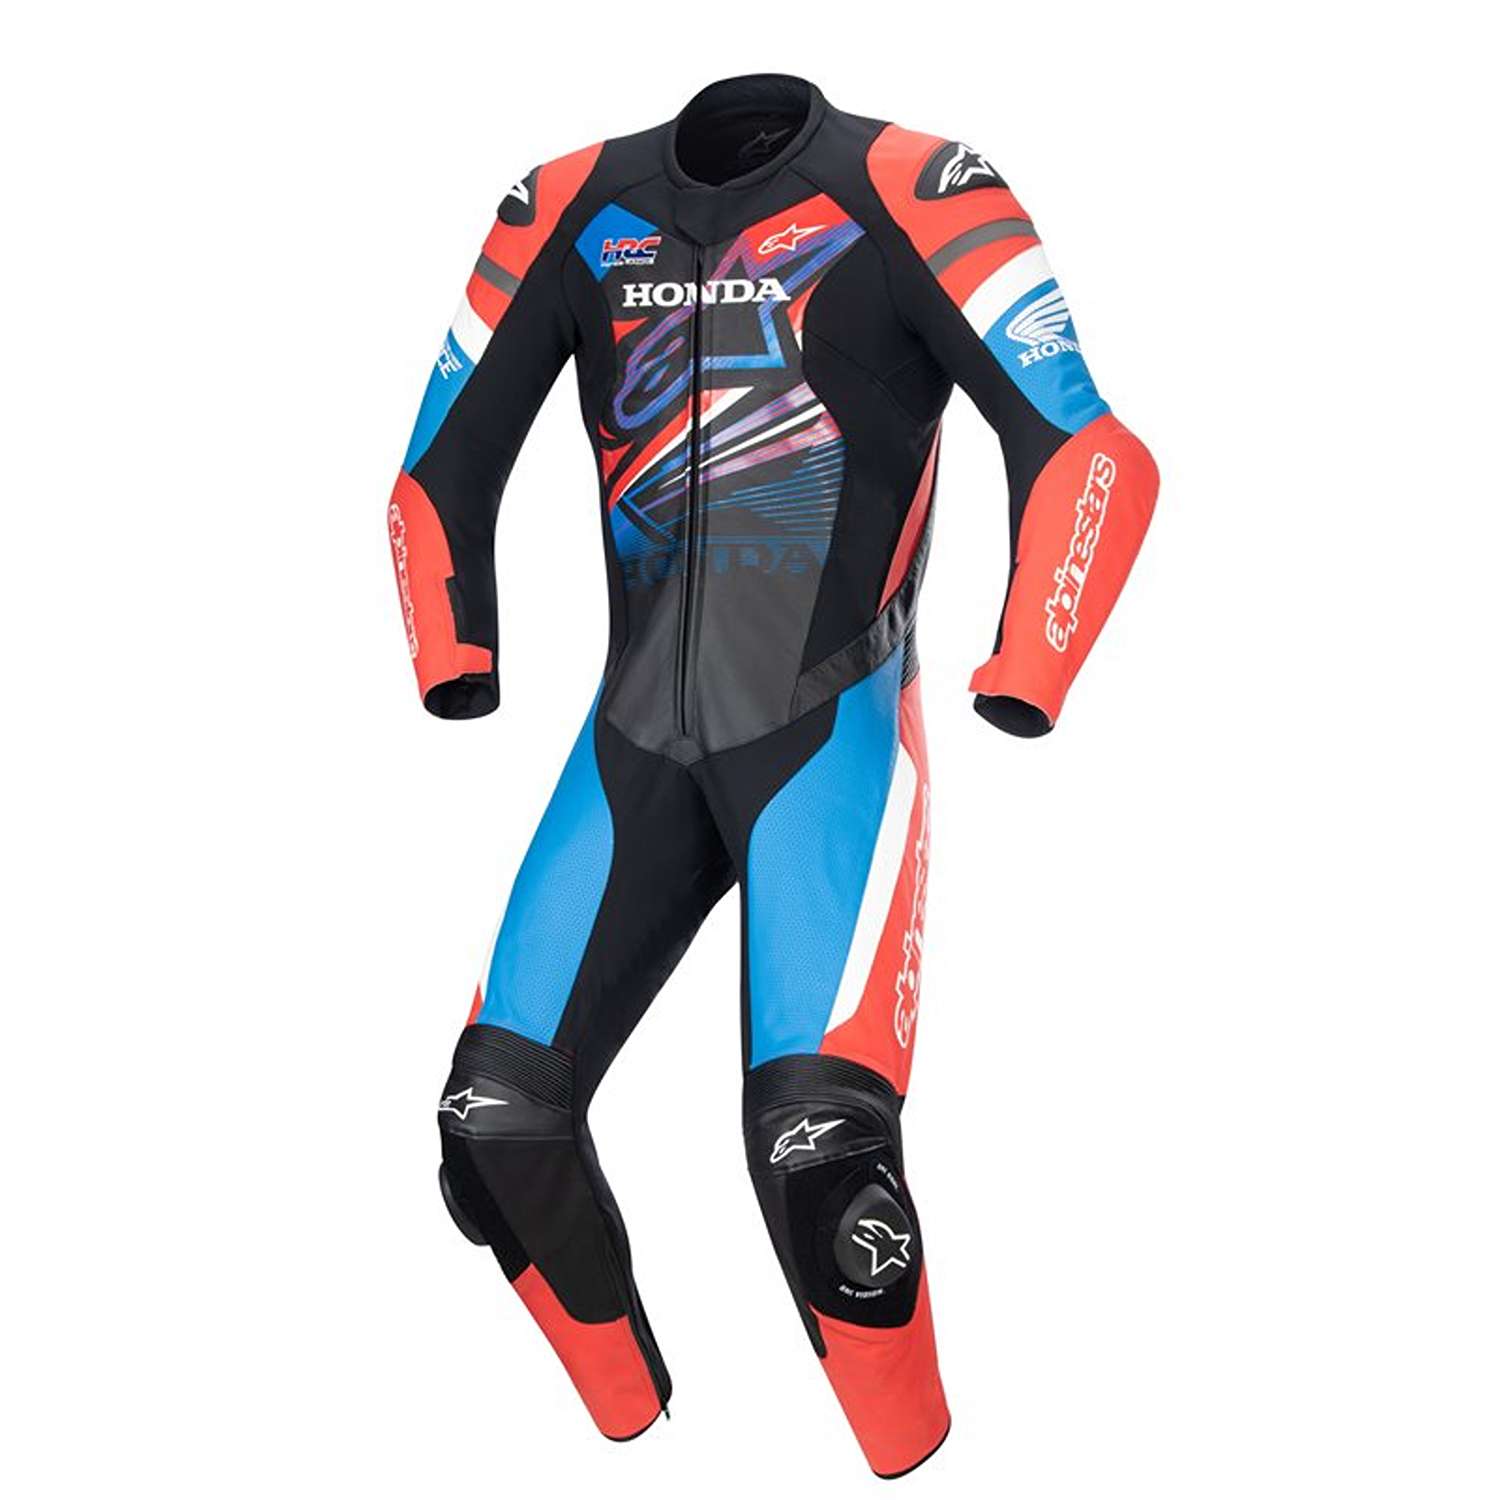 Image of Alpinestars Honda Gp Force Leather Suit Black Bright Red Blue Taille 58